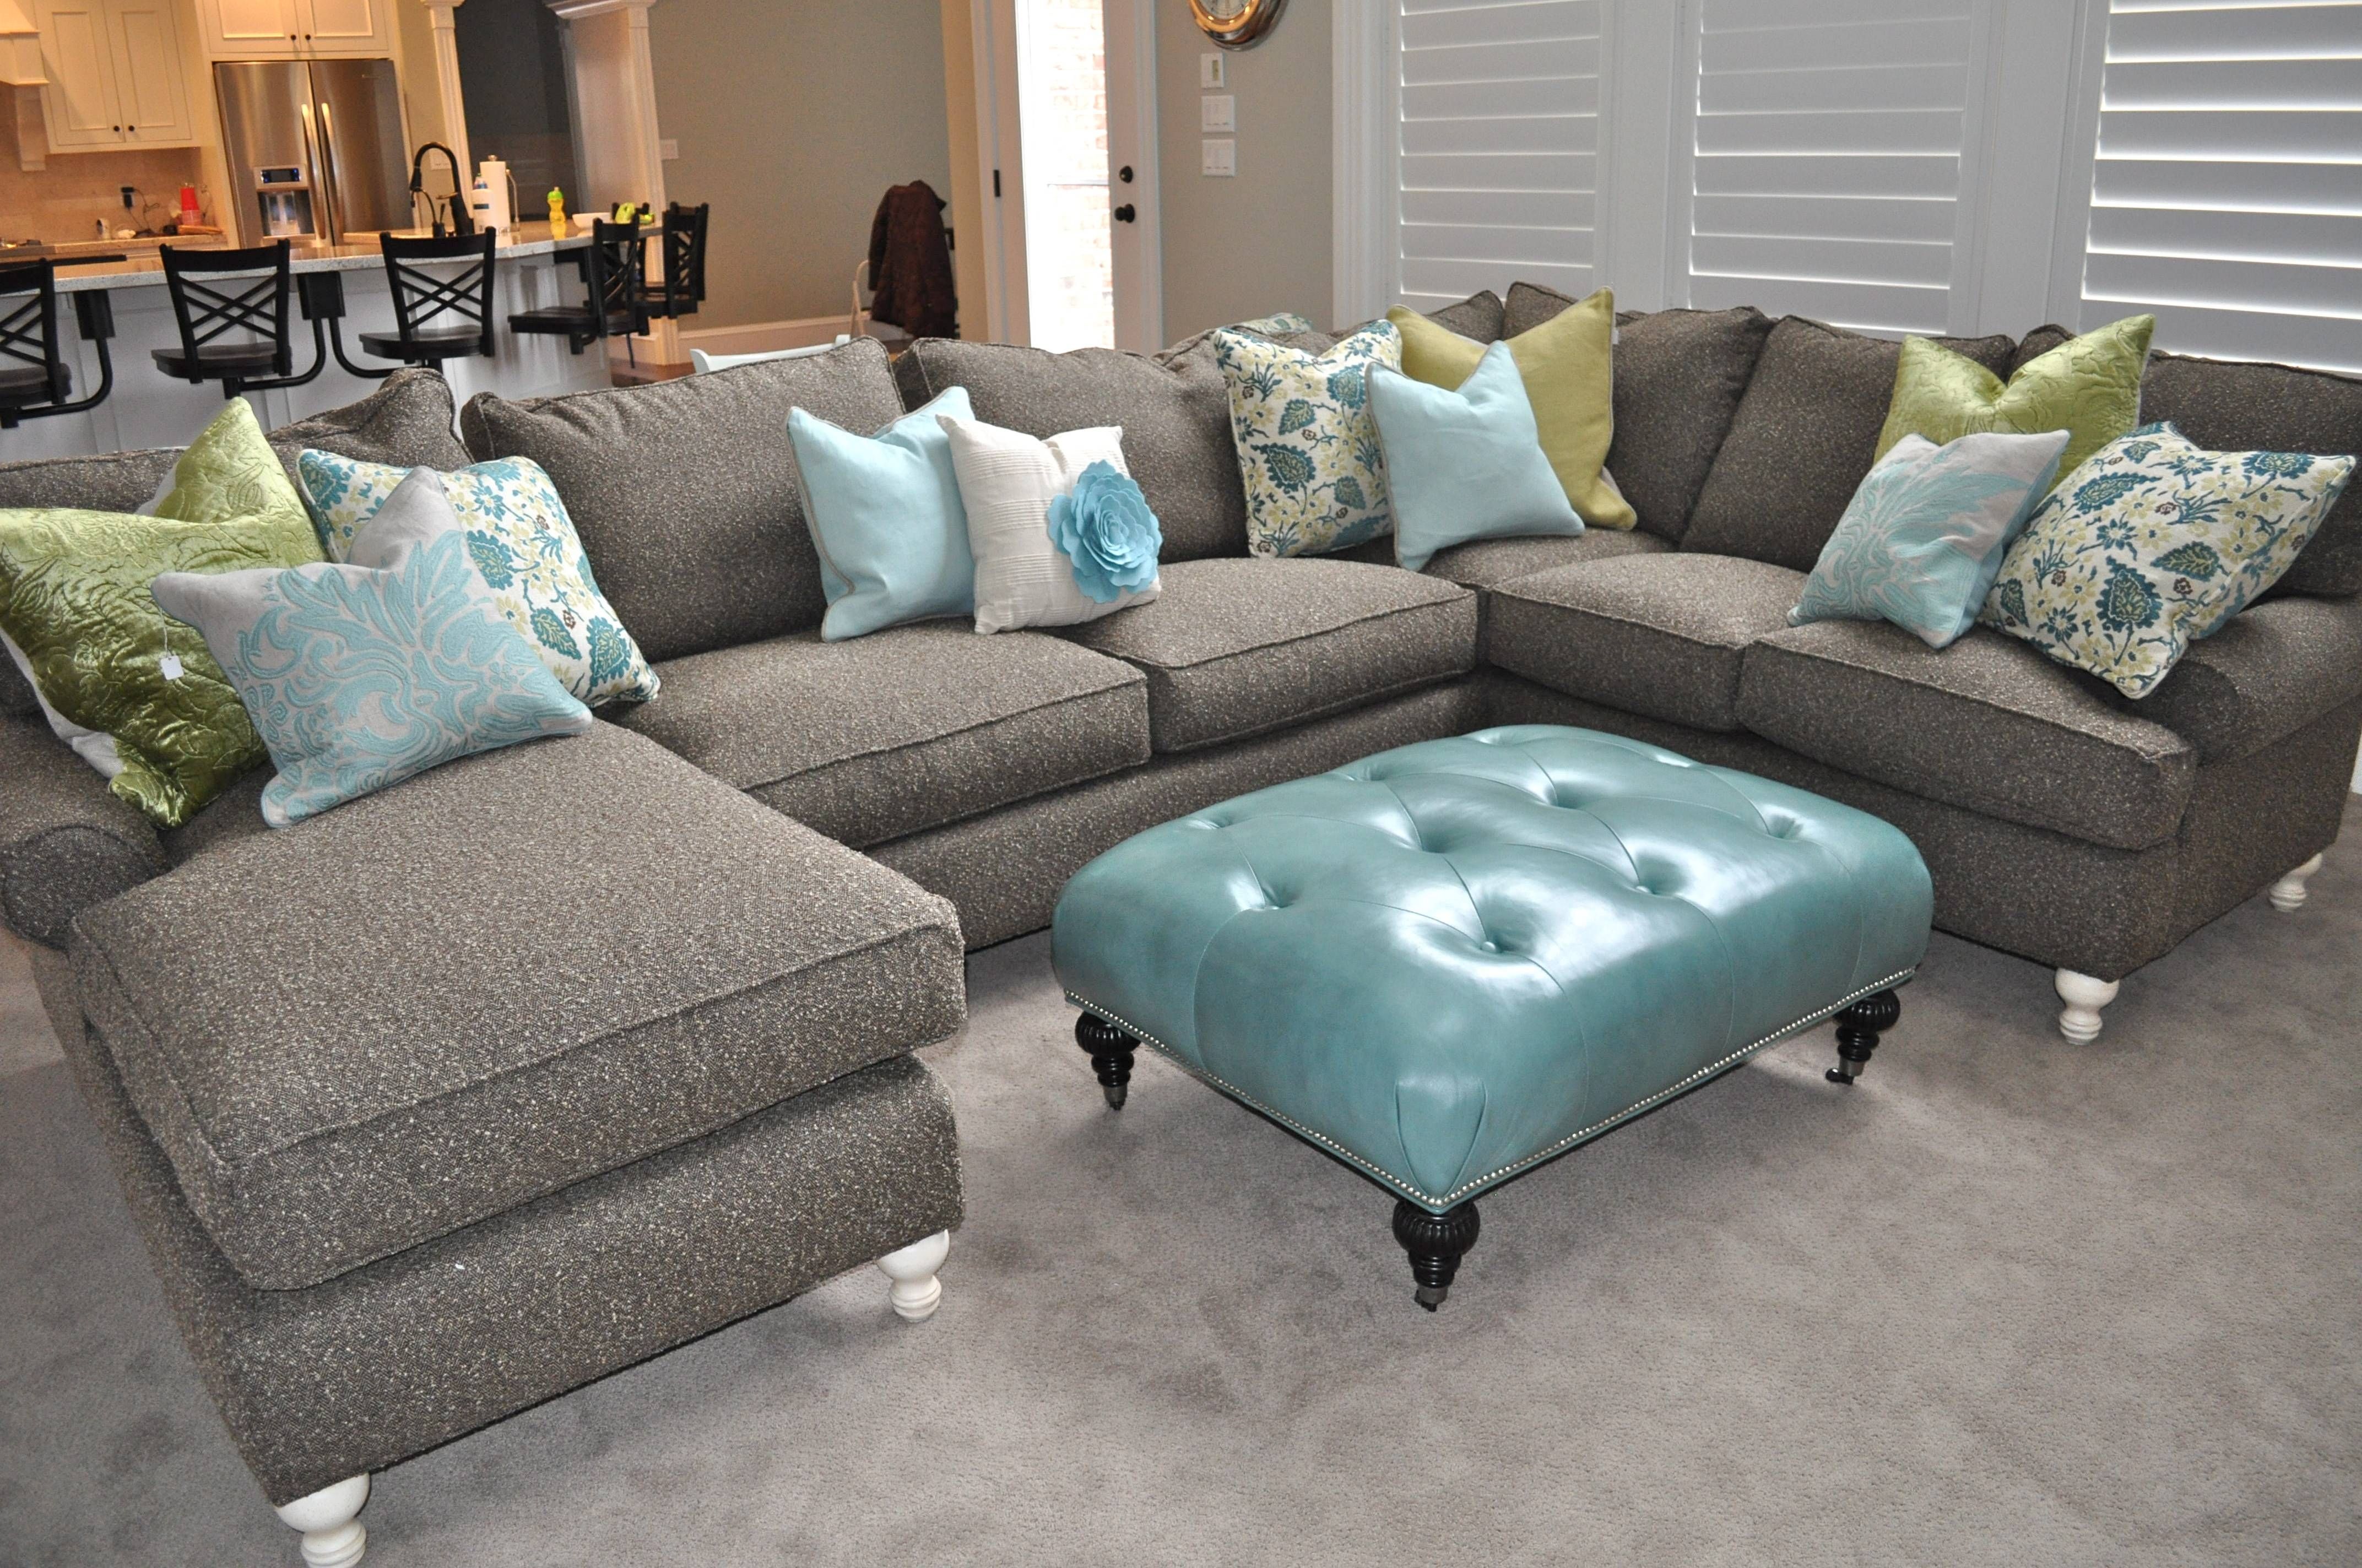 Sofas Center : Small Down Sectional Sofa Menzilperde Net With Down Filled Sectional Sofas (View 3 of 30)